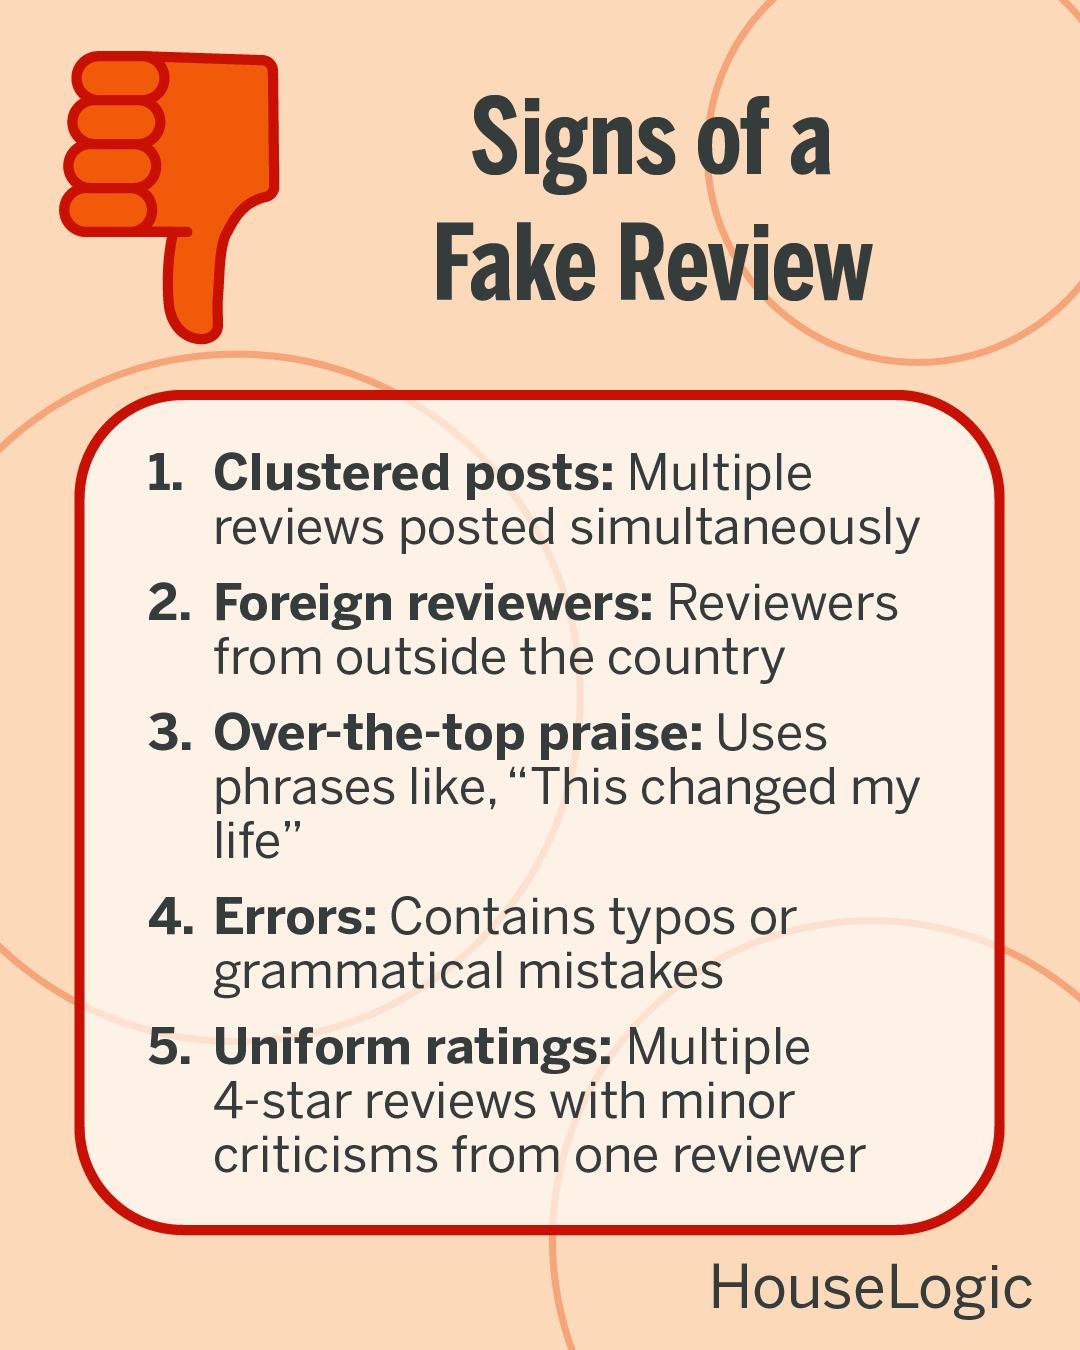 Signs of a fake review include: Clustered posts, foreign reviewers, over-the-top-praise, errors, and uniform ratings